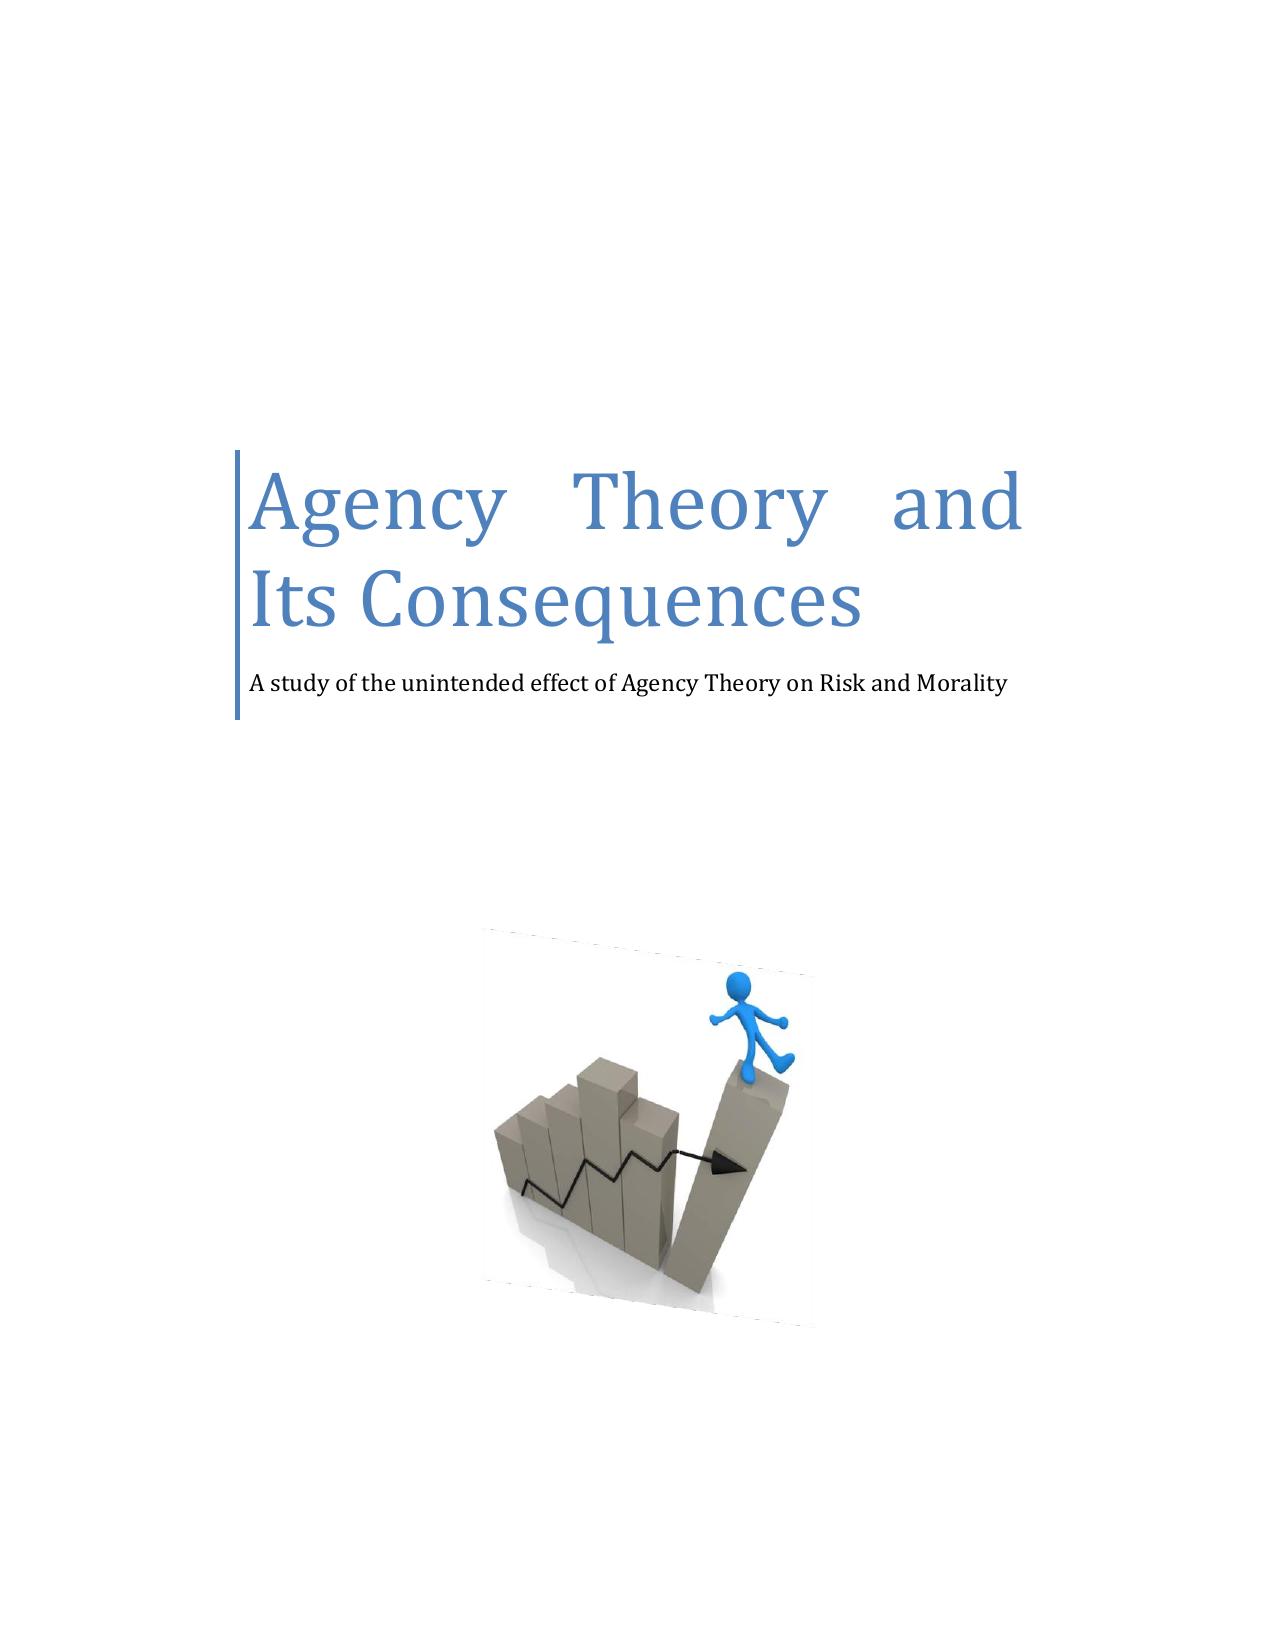 Agency Theory and Its Consequences